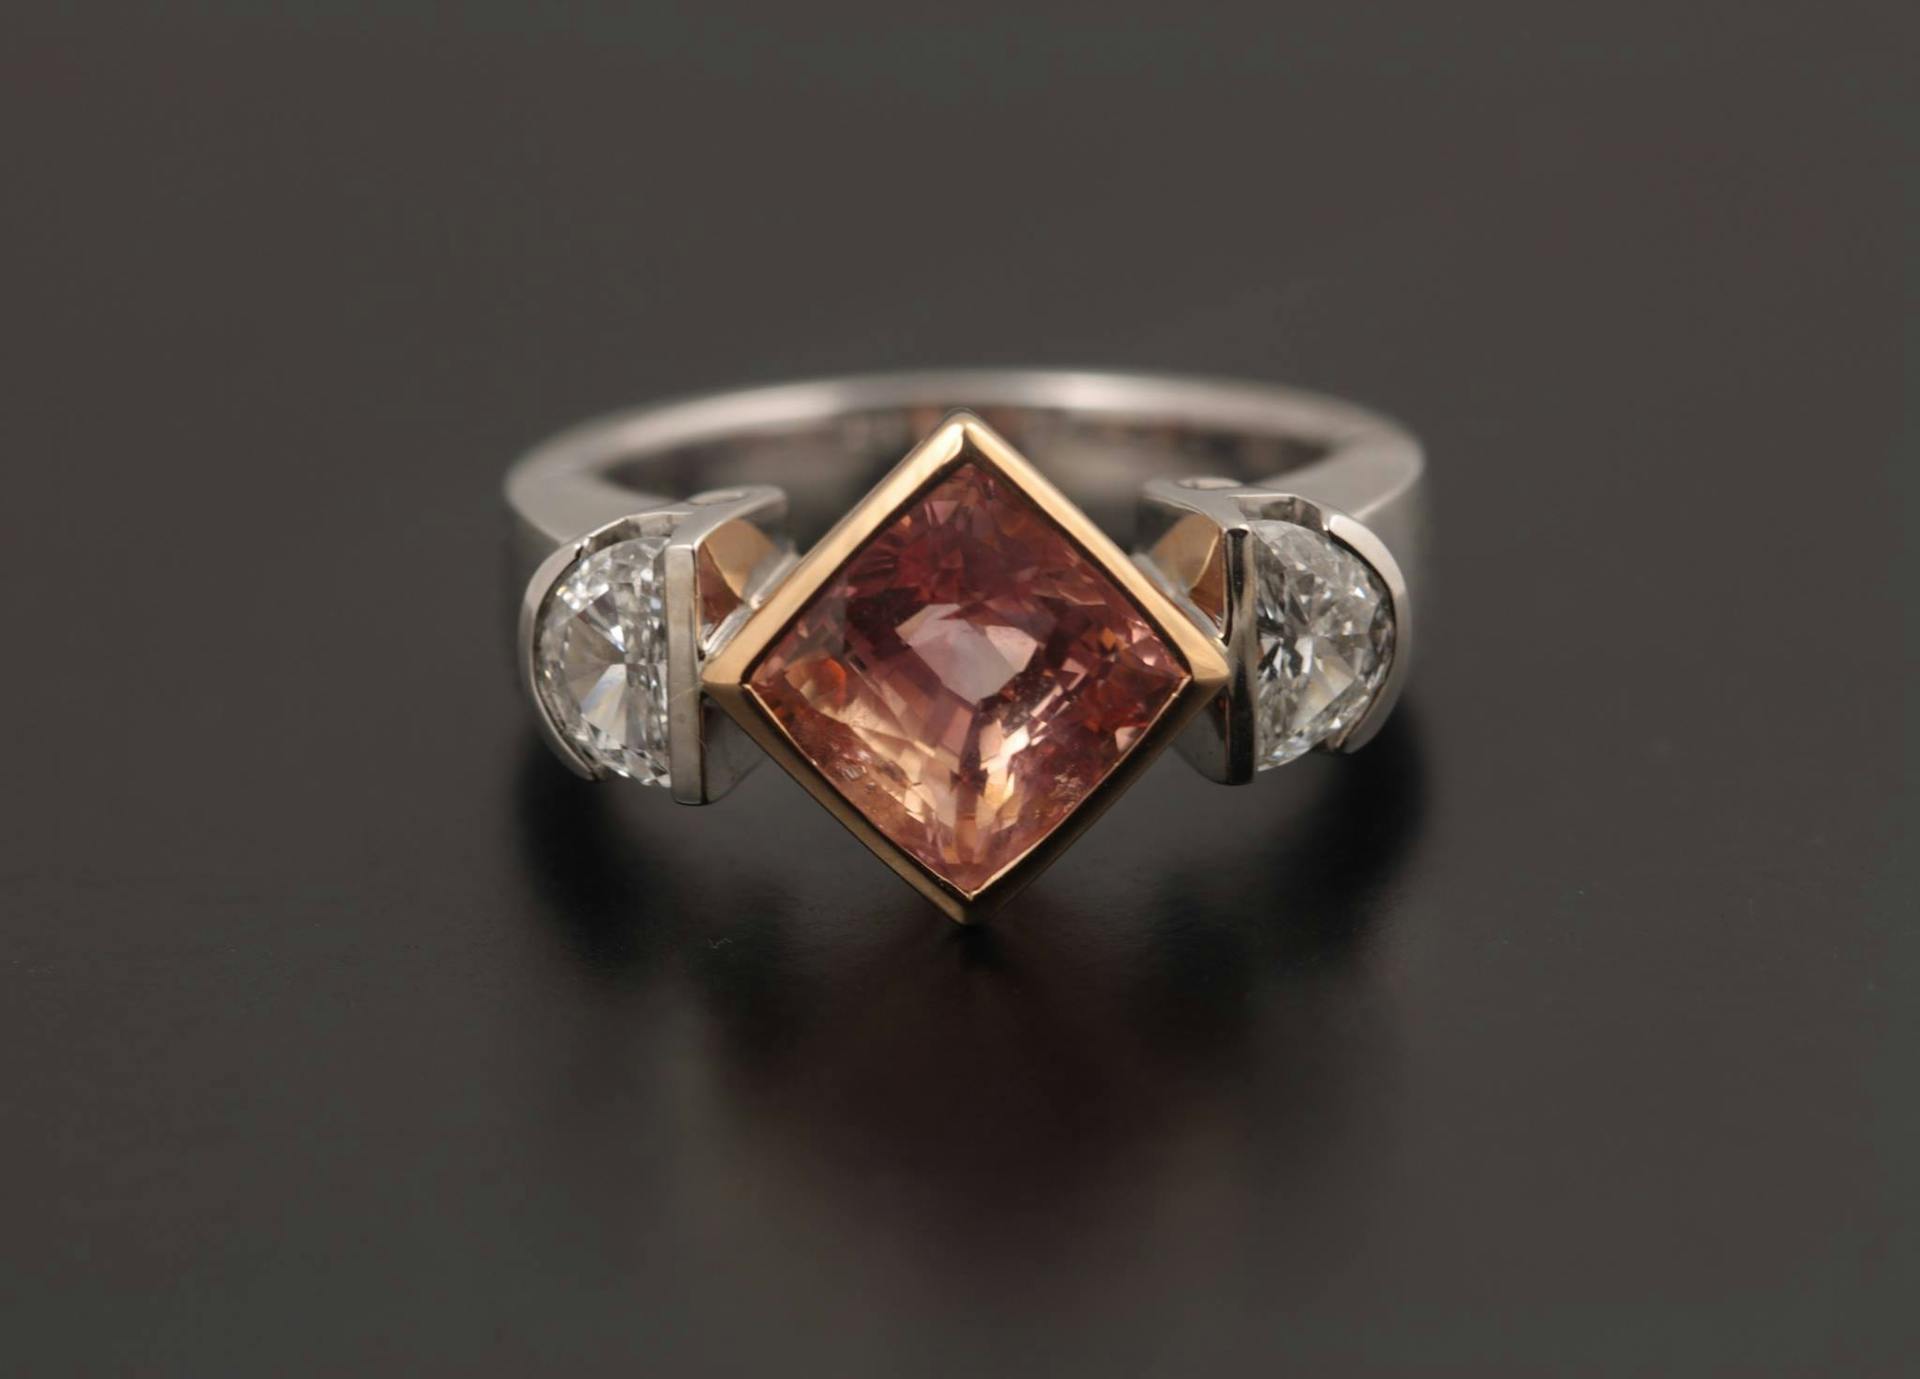 padparadscha sapphire buying guide - 3.03ct stone mixed metal ring